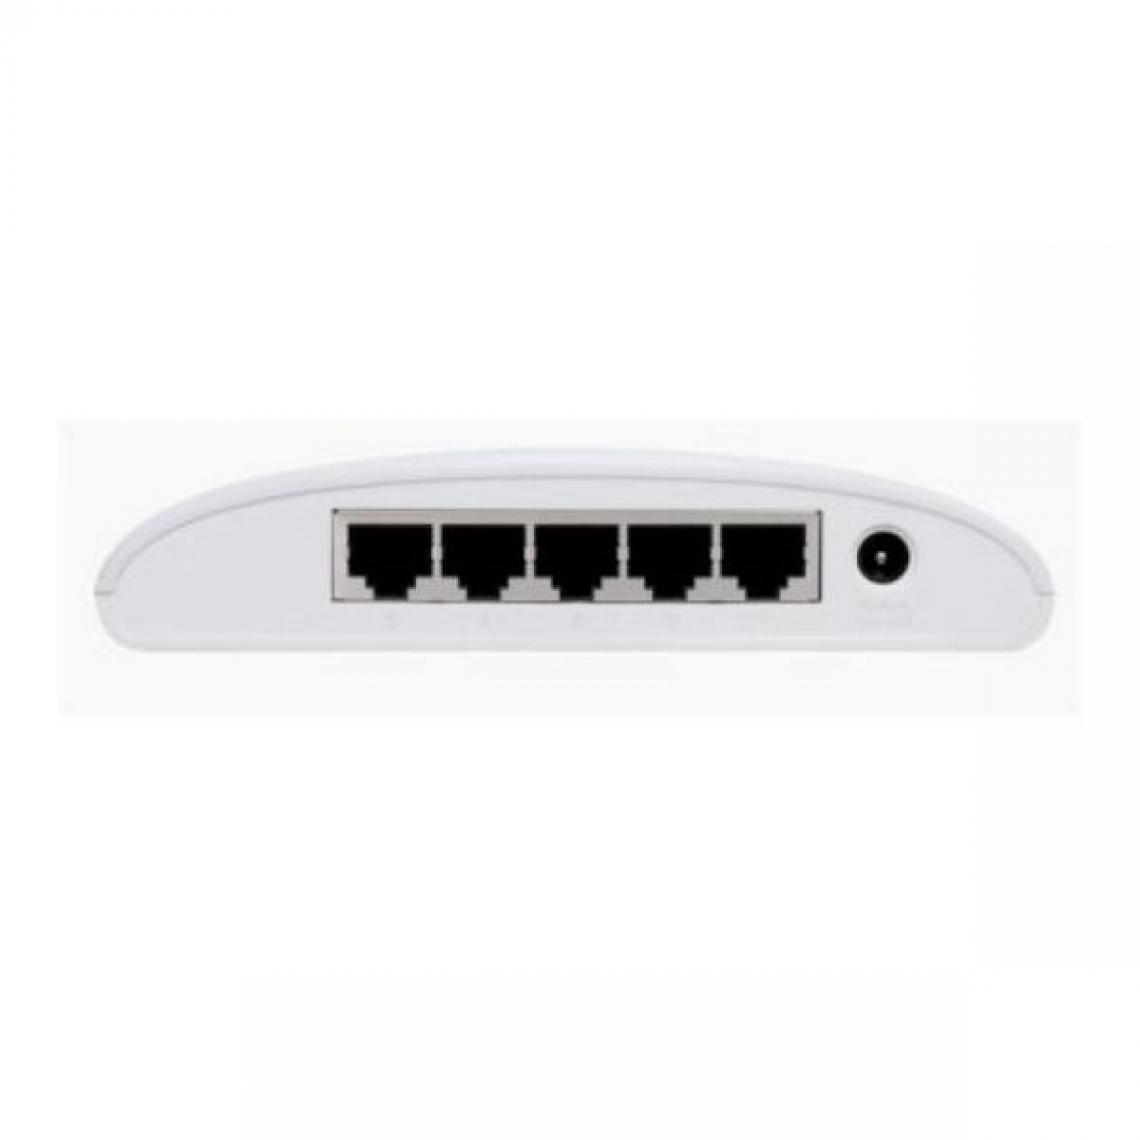 Unknown - Switch D-Link DGS-1005D 5 p 10 / 100 / 1000 Mbps - Switch